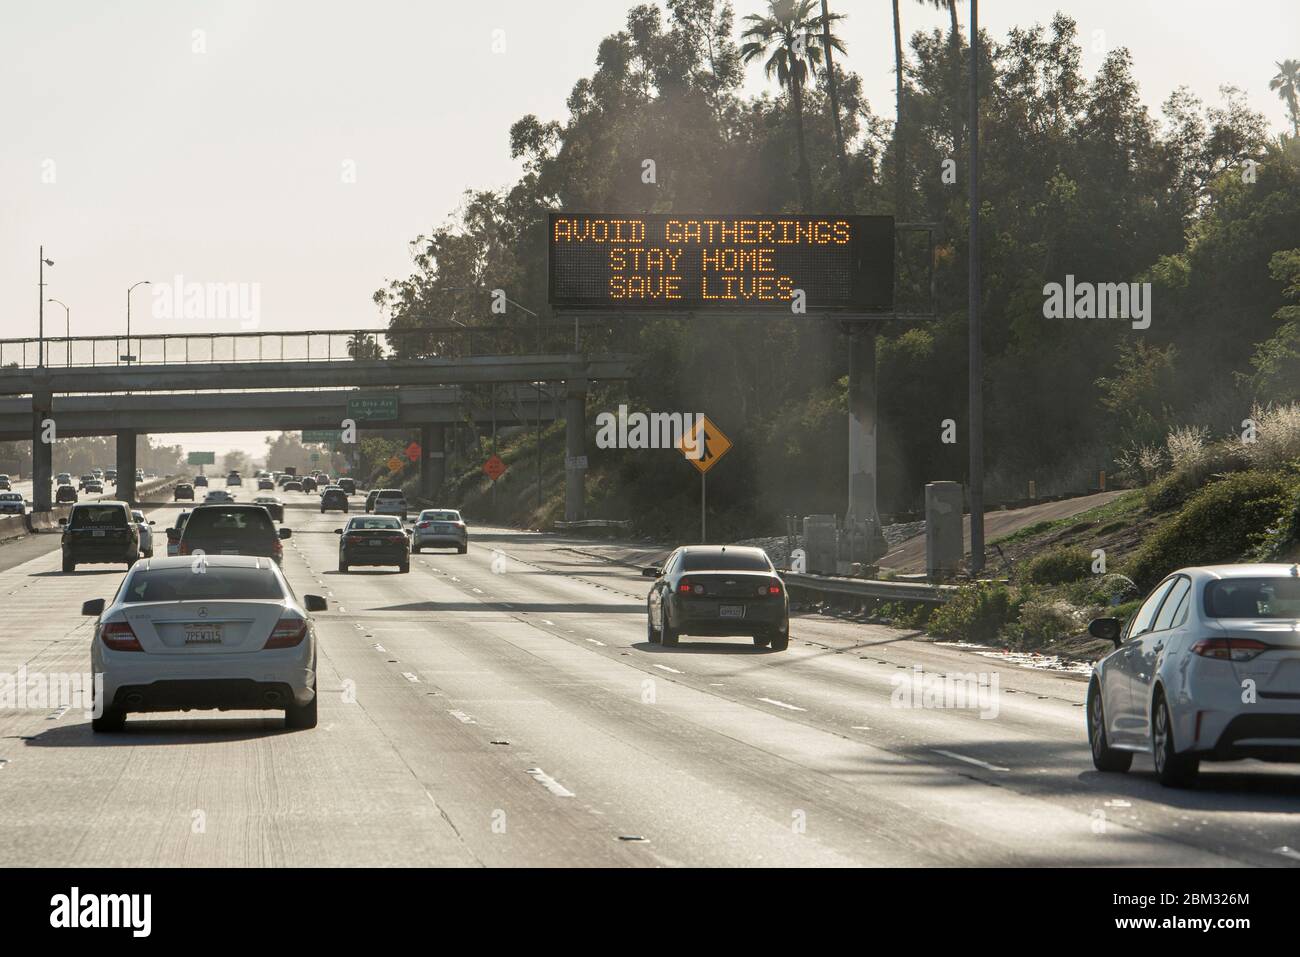 Los Angeles, California, USA. 3rd May, 2020. A sign asks citizens to avoid gatherings as people go about daily life under COVID-19 restrictions in Los Angeles, California, on Sunday, May 3. Photo by Justin L. Stewart Credit: Justin L. Stewart/ZUMA Wire/Alamy Live News Stock Photo